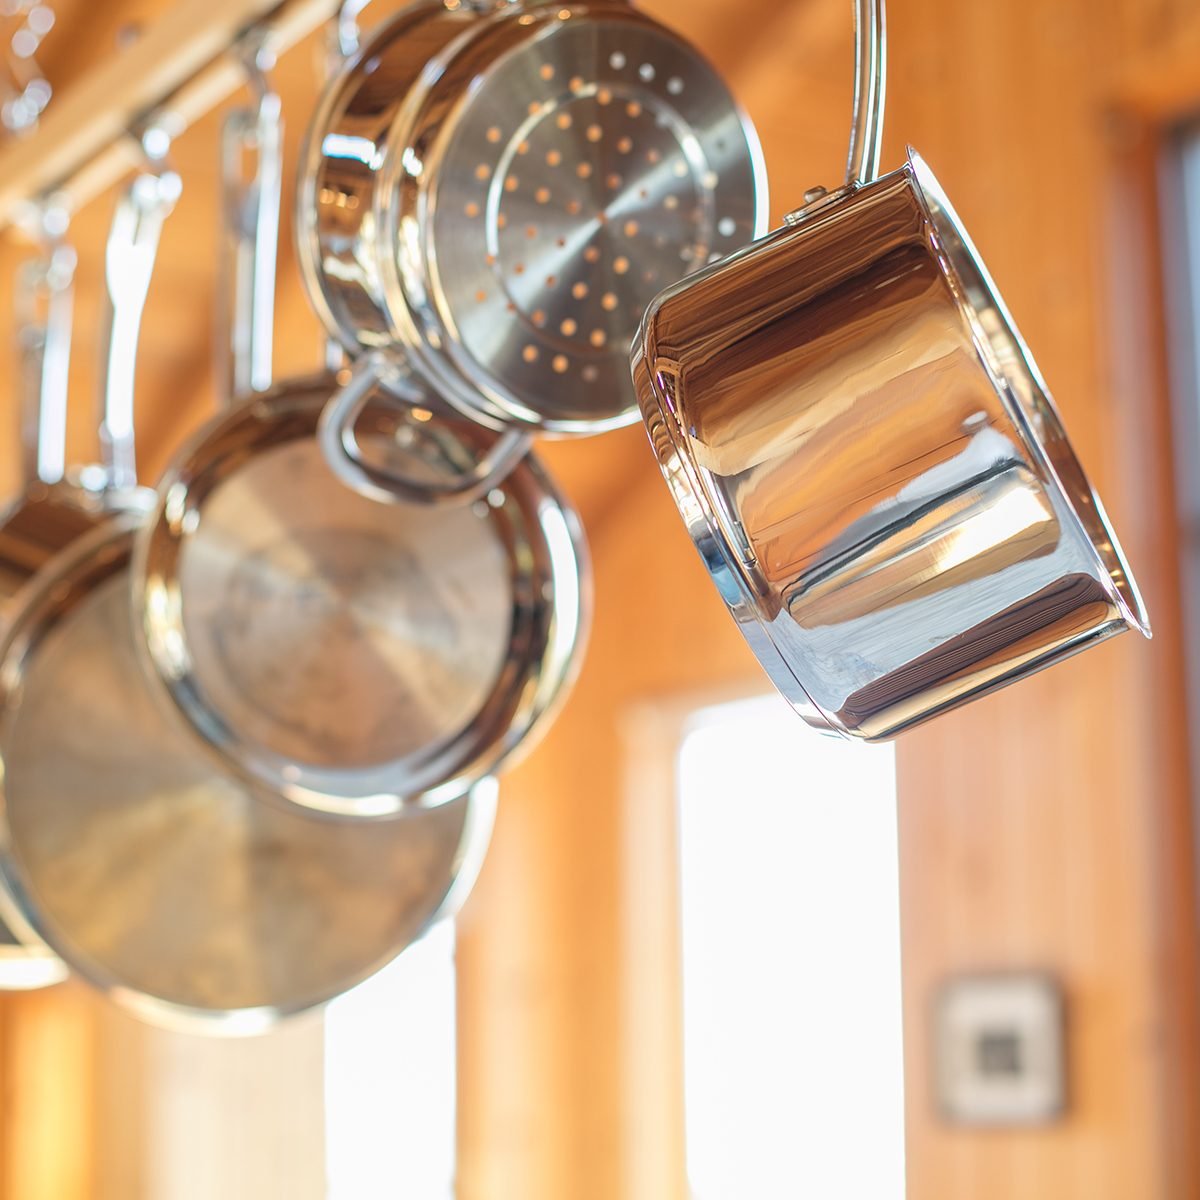 https://www.tasteofhome.com/wp-content/uploads/2019/04/pots-and-pans-hanging-in-kitchen-from-wood-rack-GettyImages-1064003760.jpg